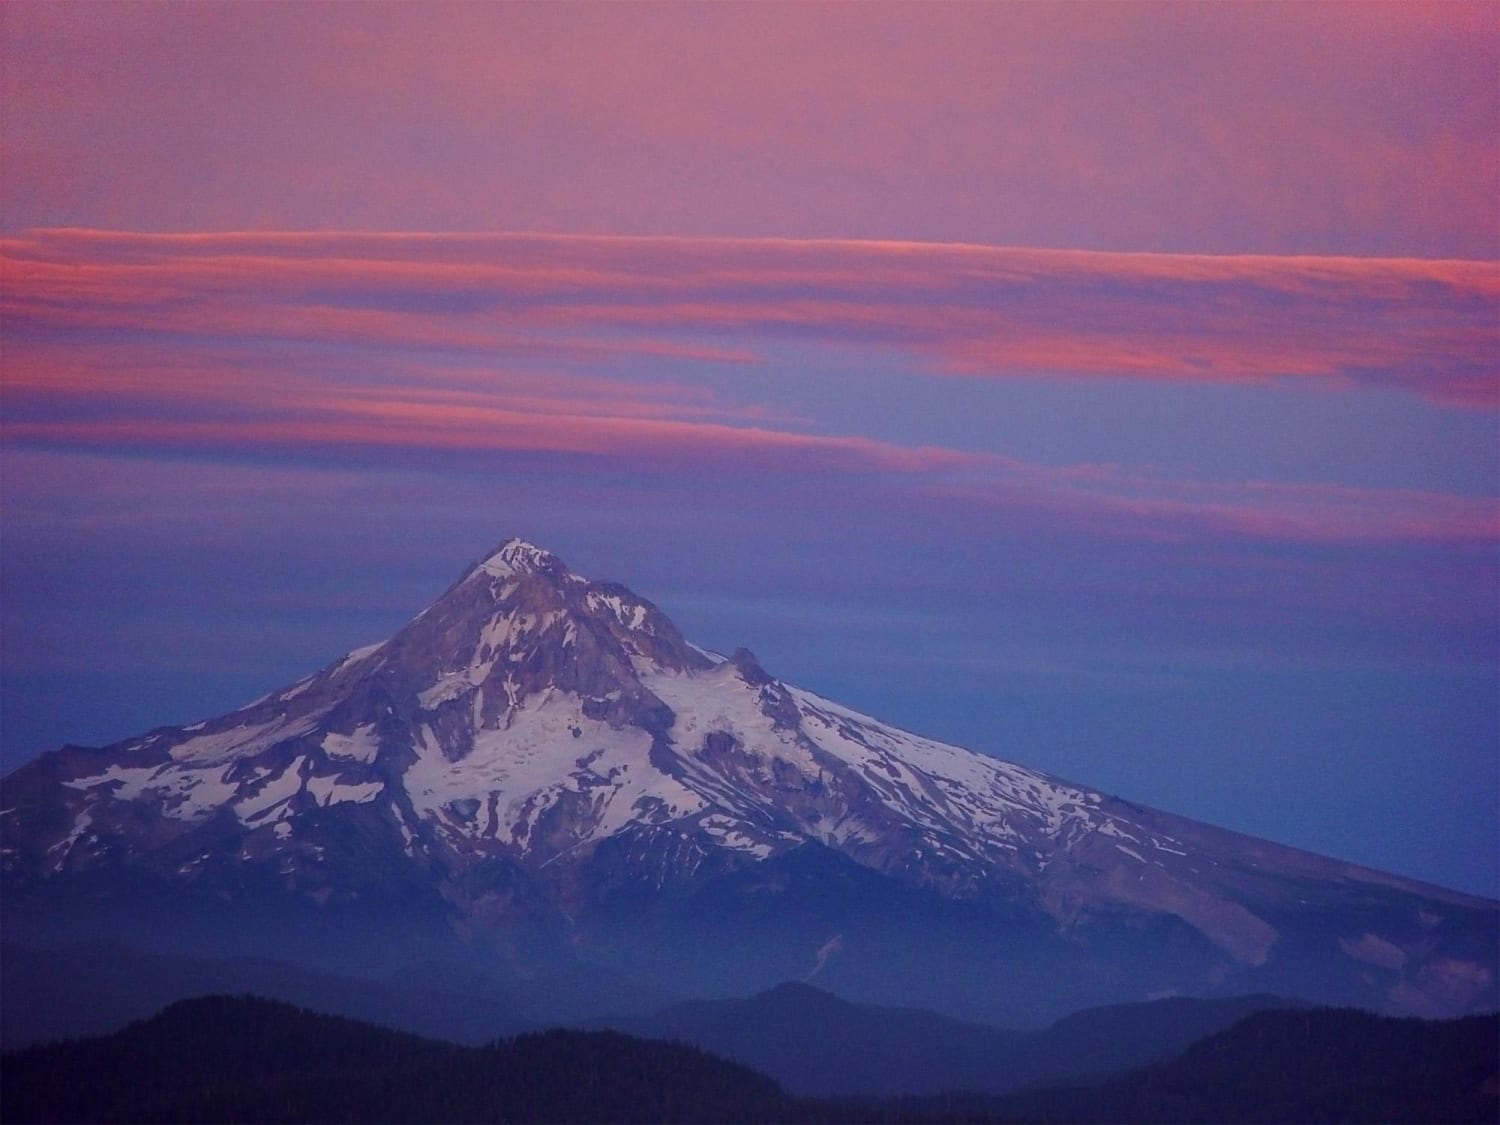 Mt. Hood at sunset, viewed from atop from Larch Mtn, Oregon